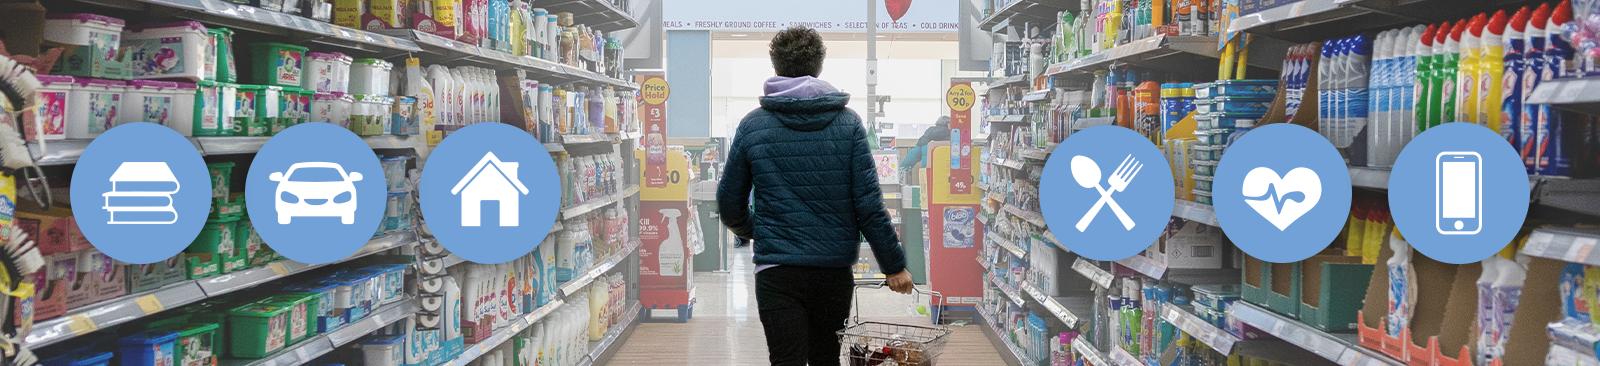 A person in a dark blue, puffy hooded jacket walks away from the camera and down a supermarket aisle with household items stacked on the shelves on both sides. The person carries a shopping basket containing only the few items they could afford as they walk toward the checkout lanes.